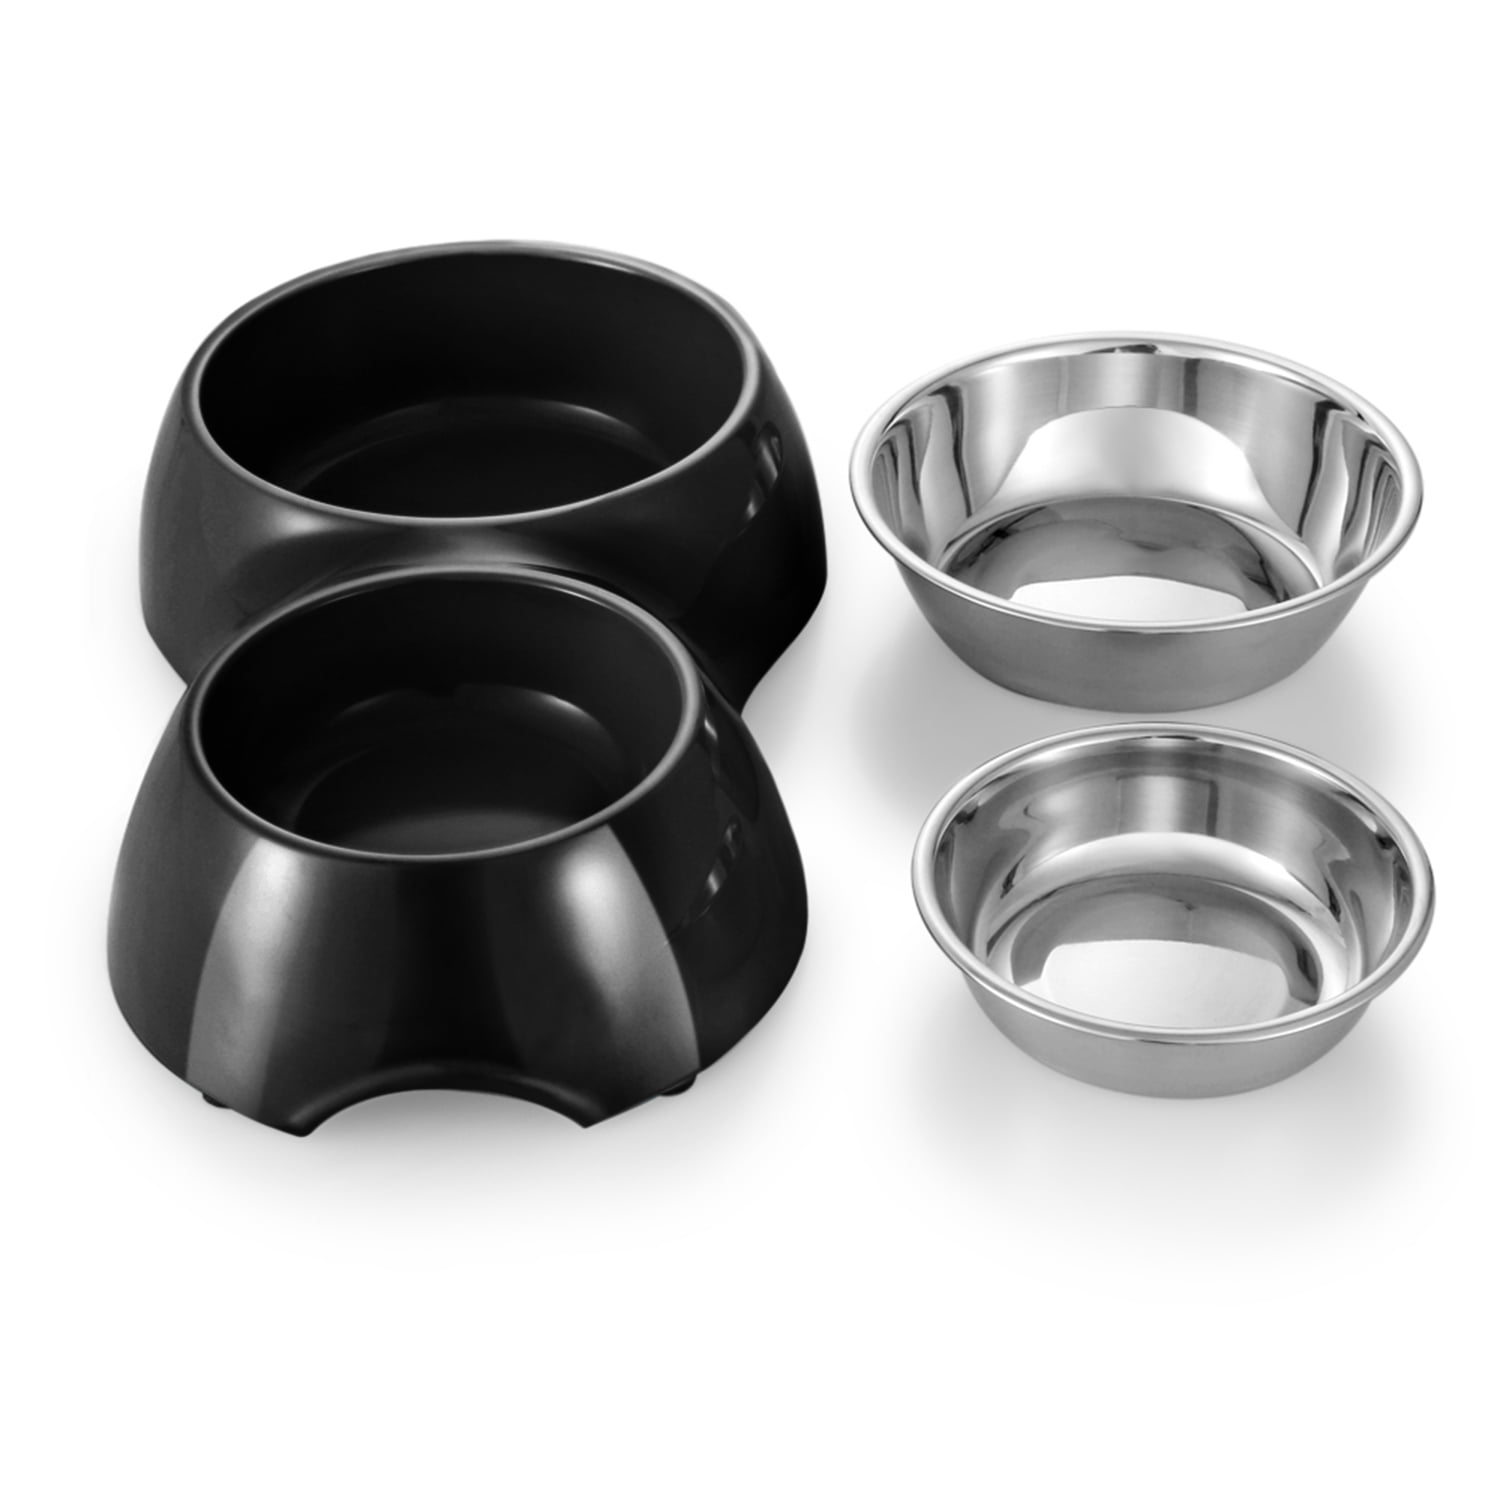 Dropship Dog Bowls Double Dog Water And Food Bowls Stainless Steel Bowls  With Non-Slip Resin Station, Pet Feeder Bowls For Puppy Medium Dogs Cats to  Sell Online at a Lower Price